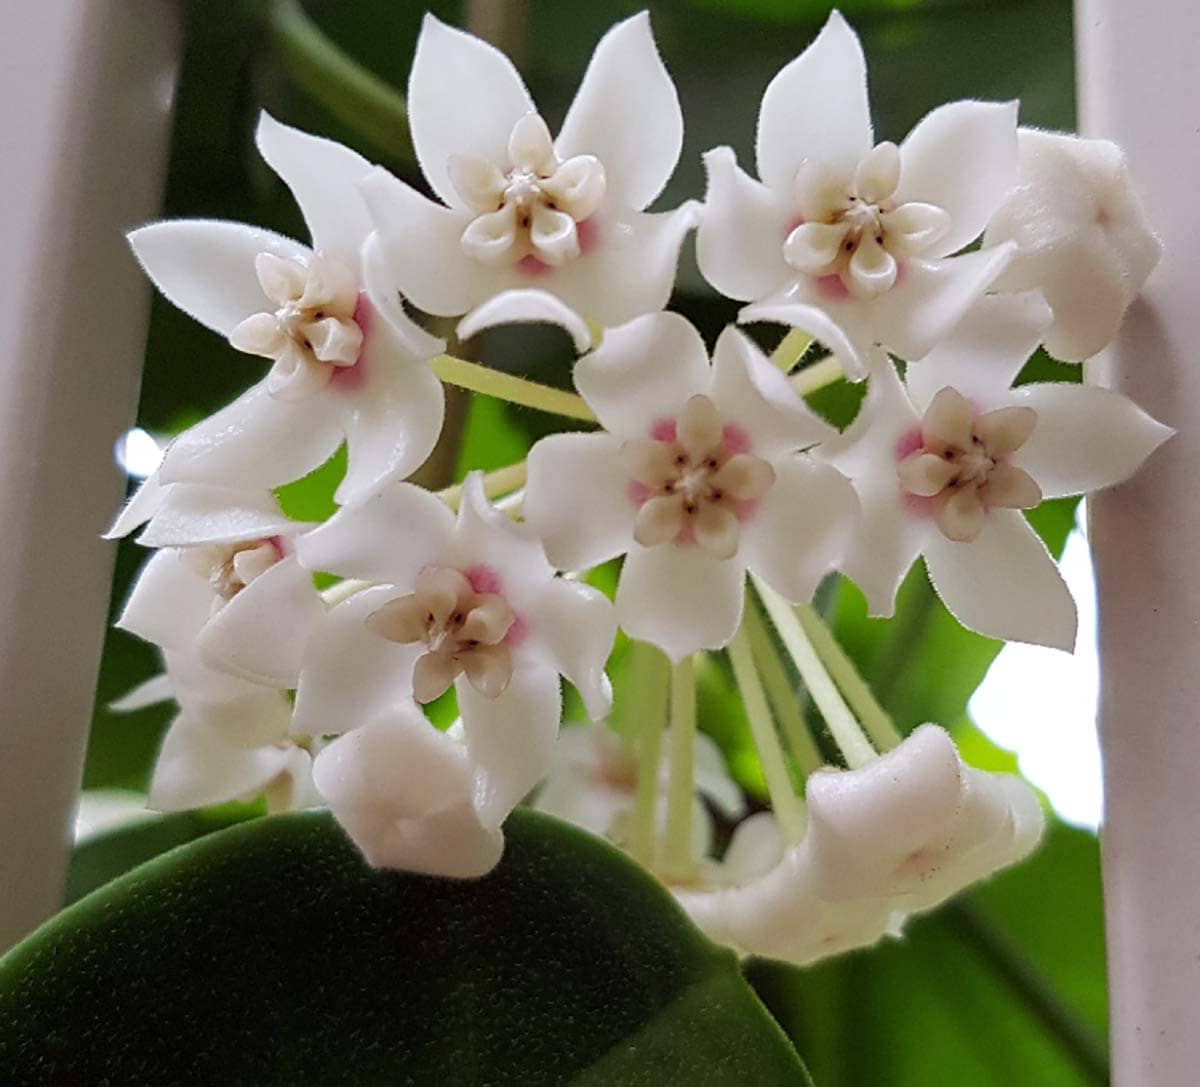 "Unlock the Beauty Everything You Need to Know About Hoya Australis"